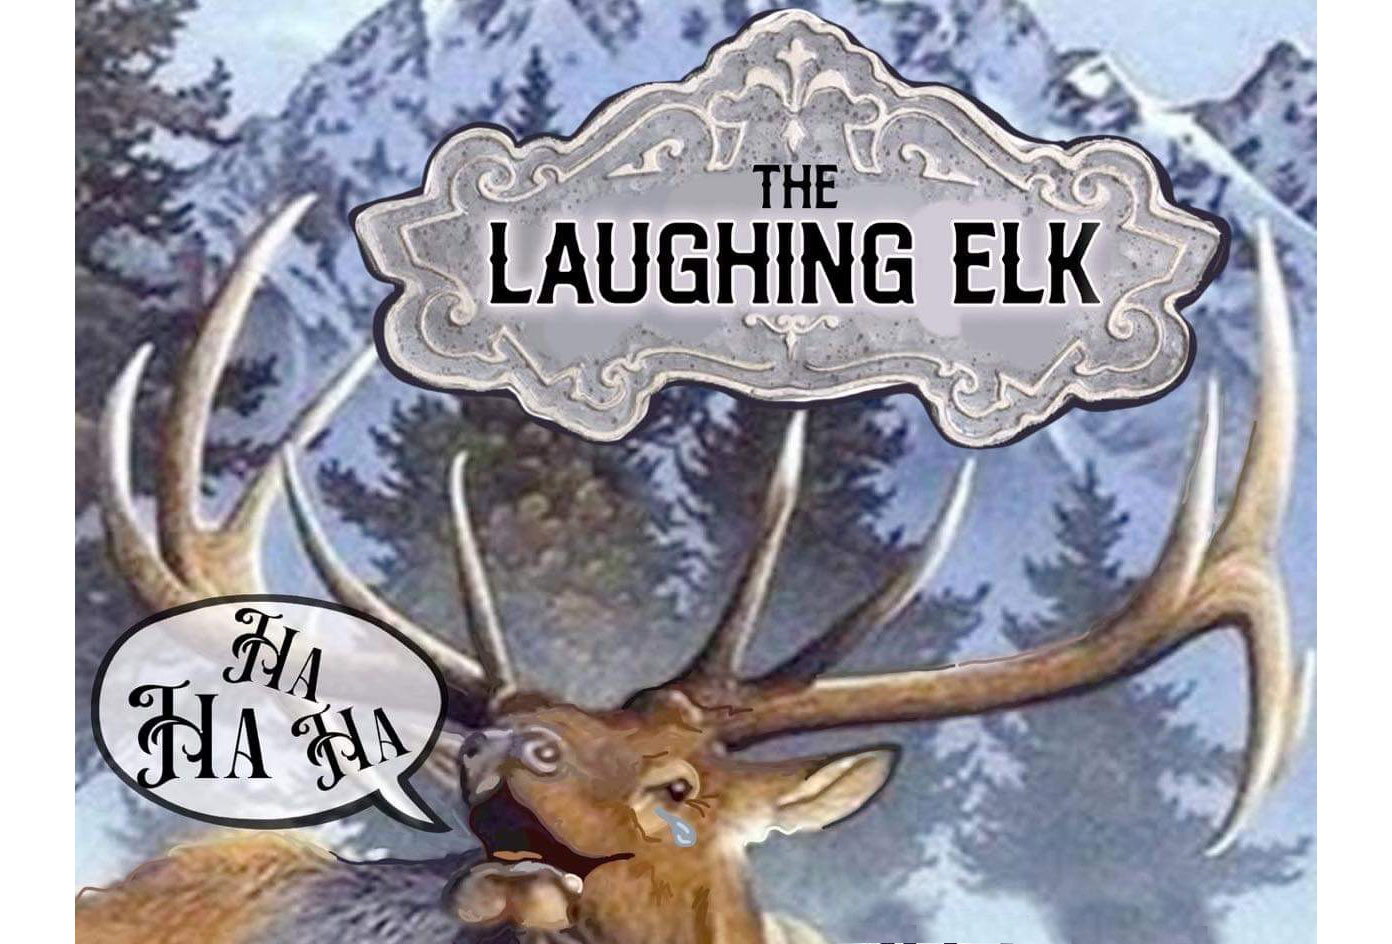 The Laughing Elk Comedy Night Presents: